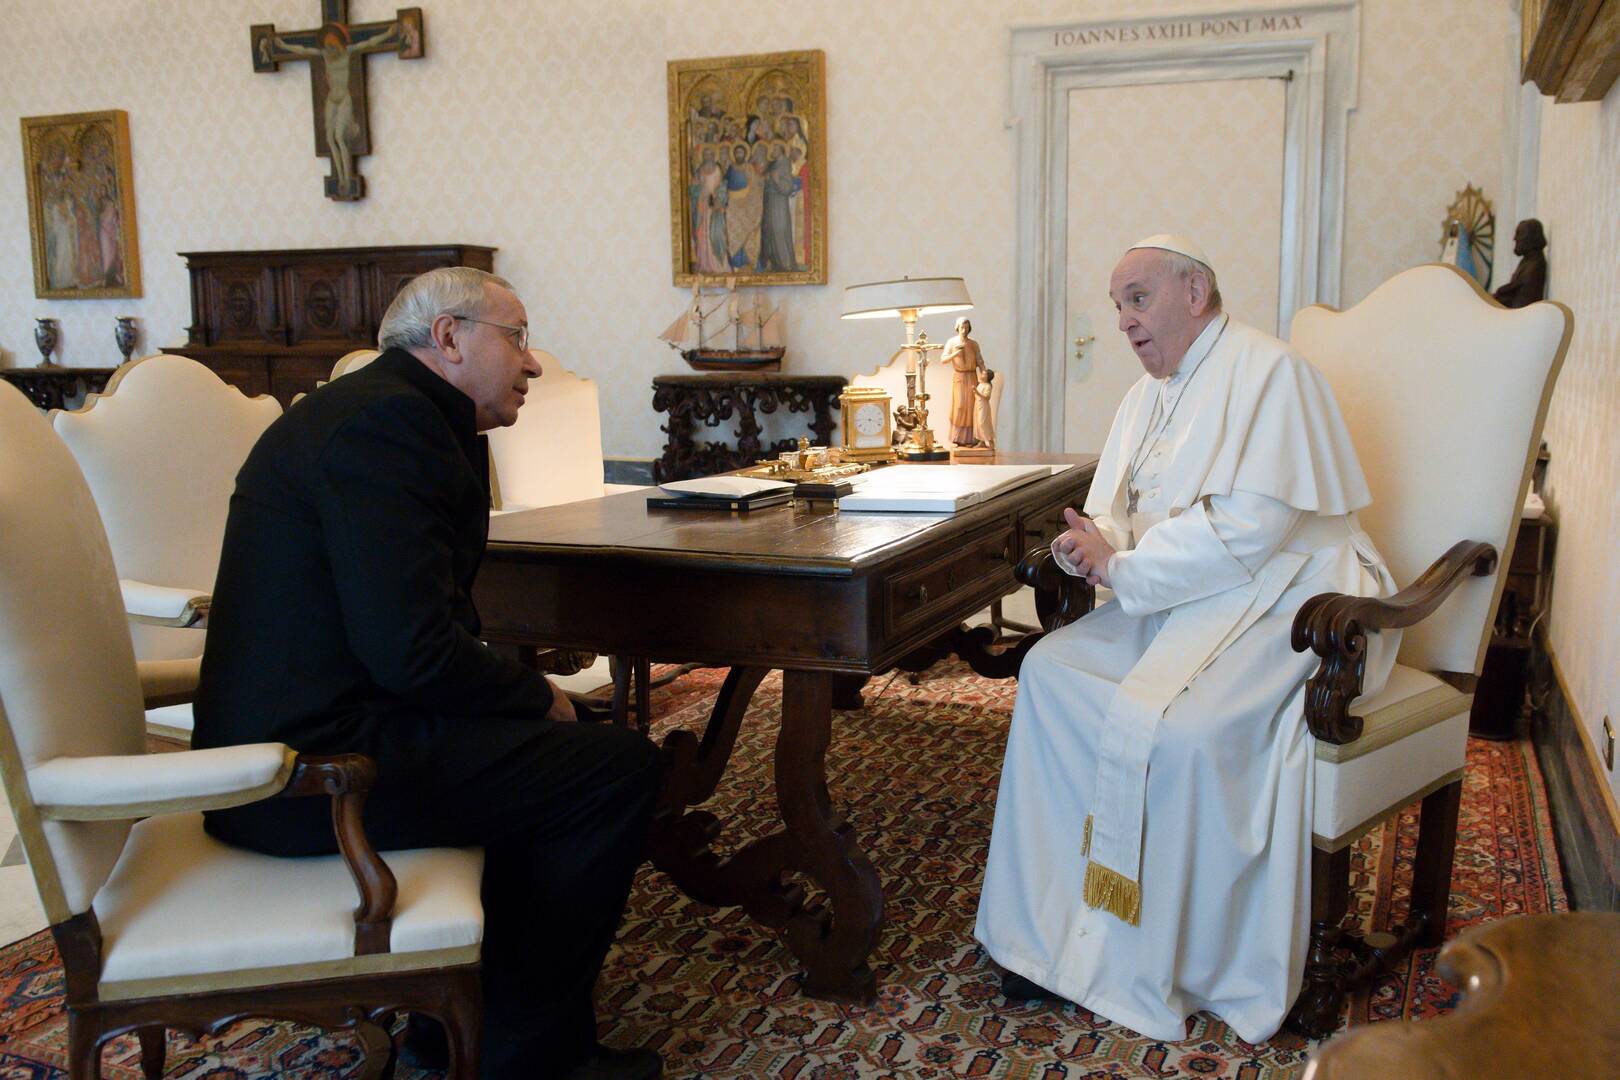 Pope Francis greets Jesuit Father Marko Rupnik during a private audience at the Vatican in this Jan. 3, 2022. (CNS photo/Vatican Media)